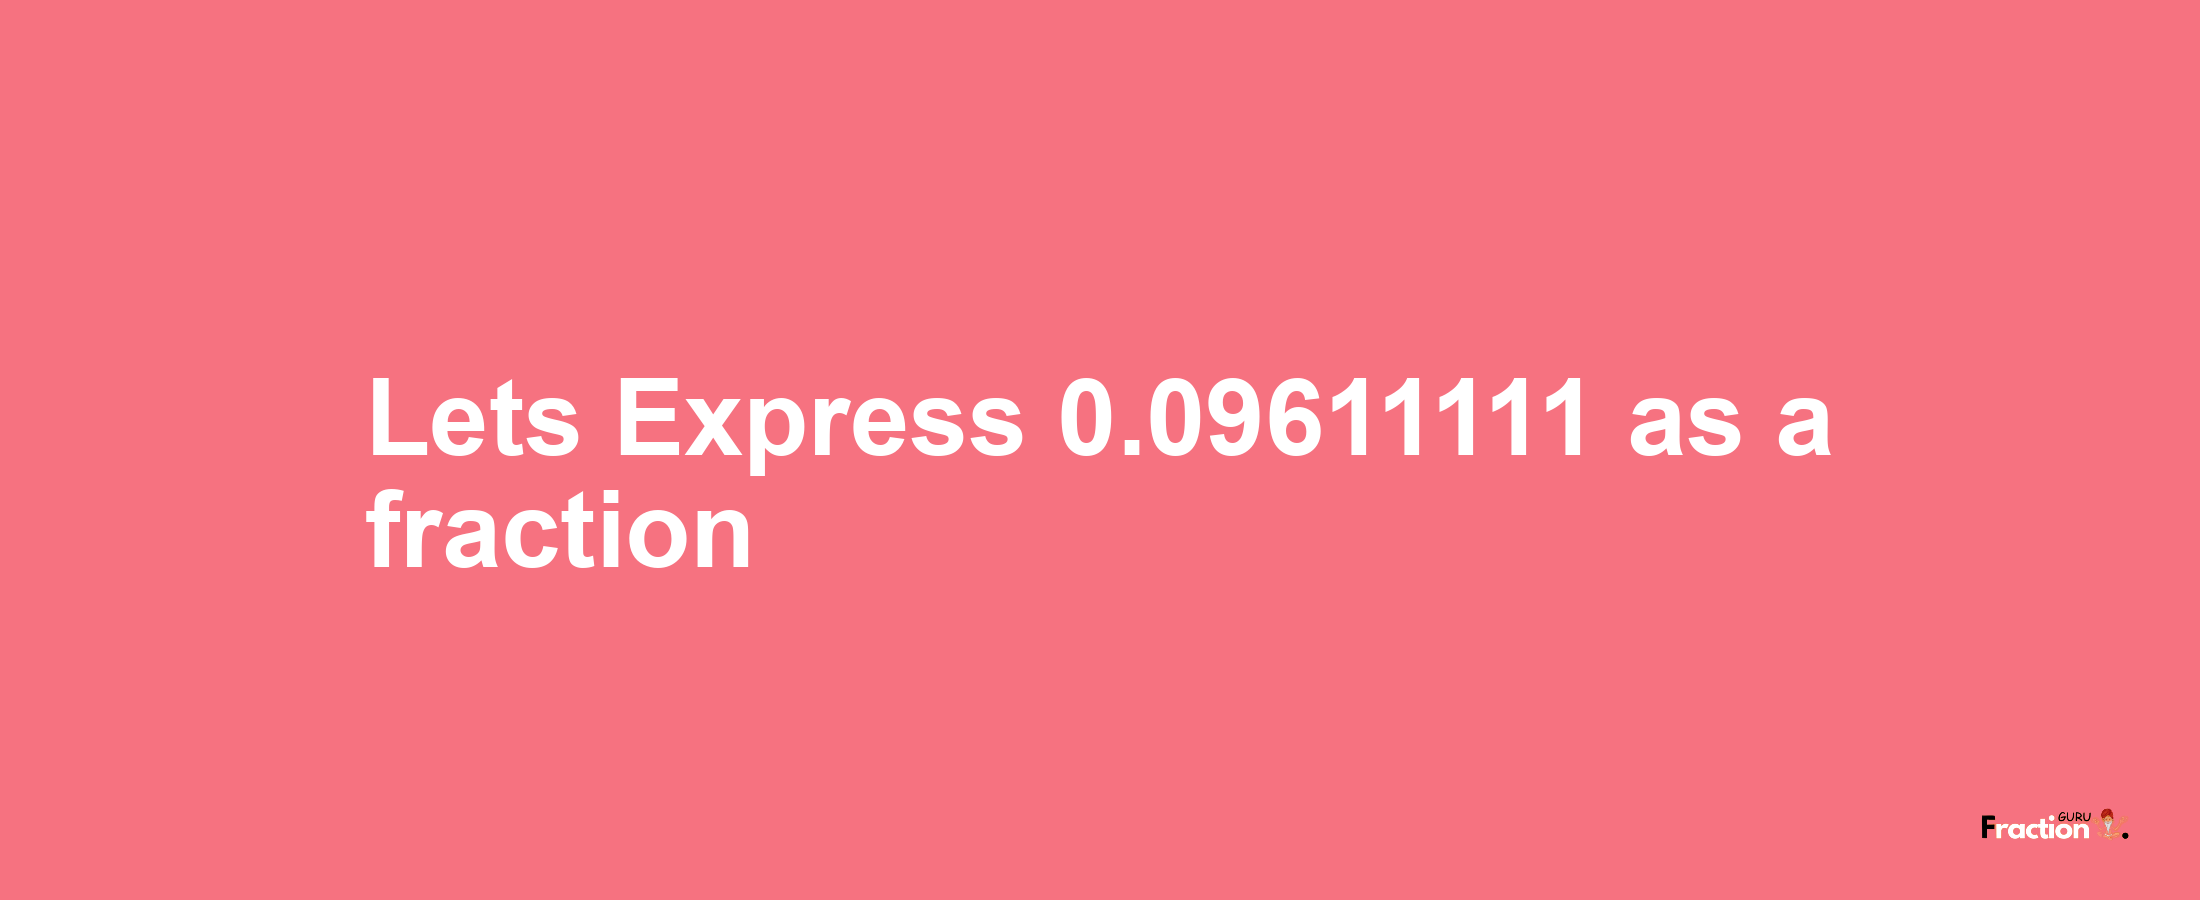 Lets Express 0.09611111 as afraction